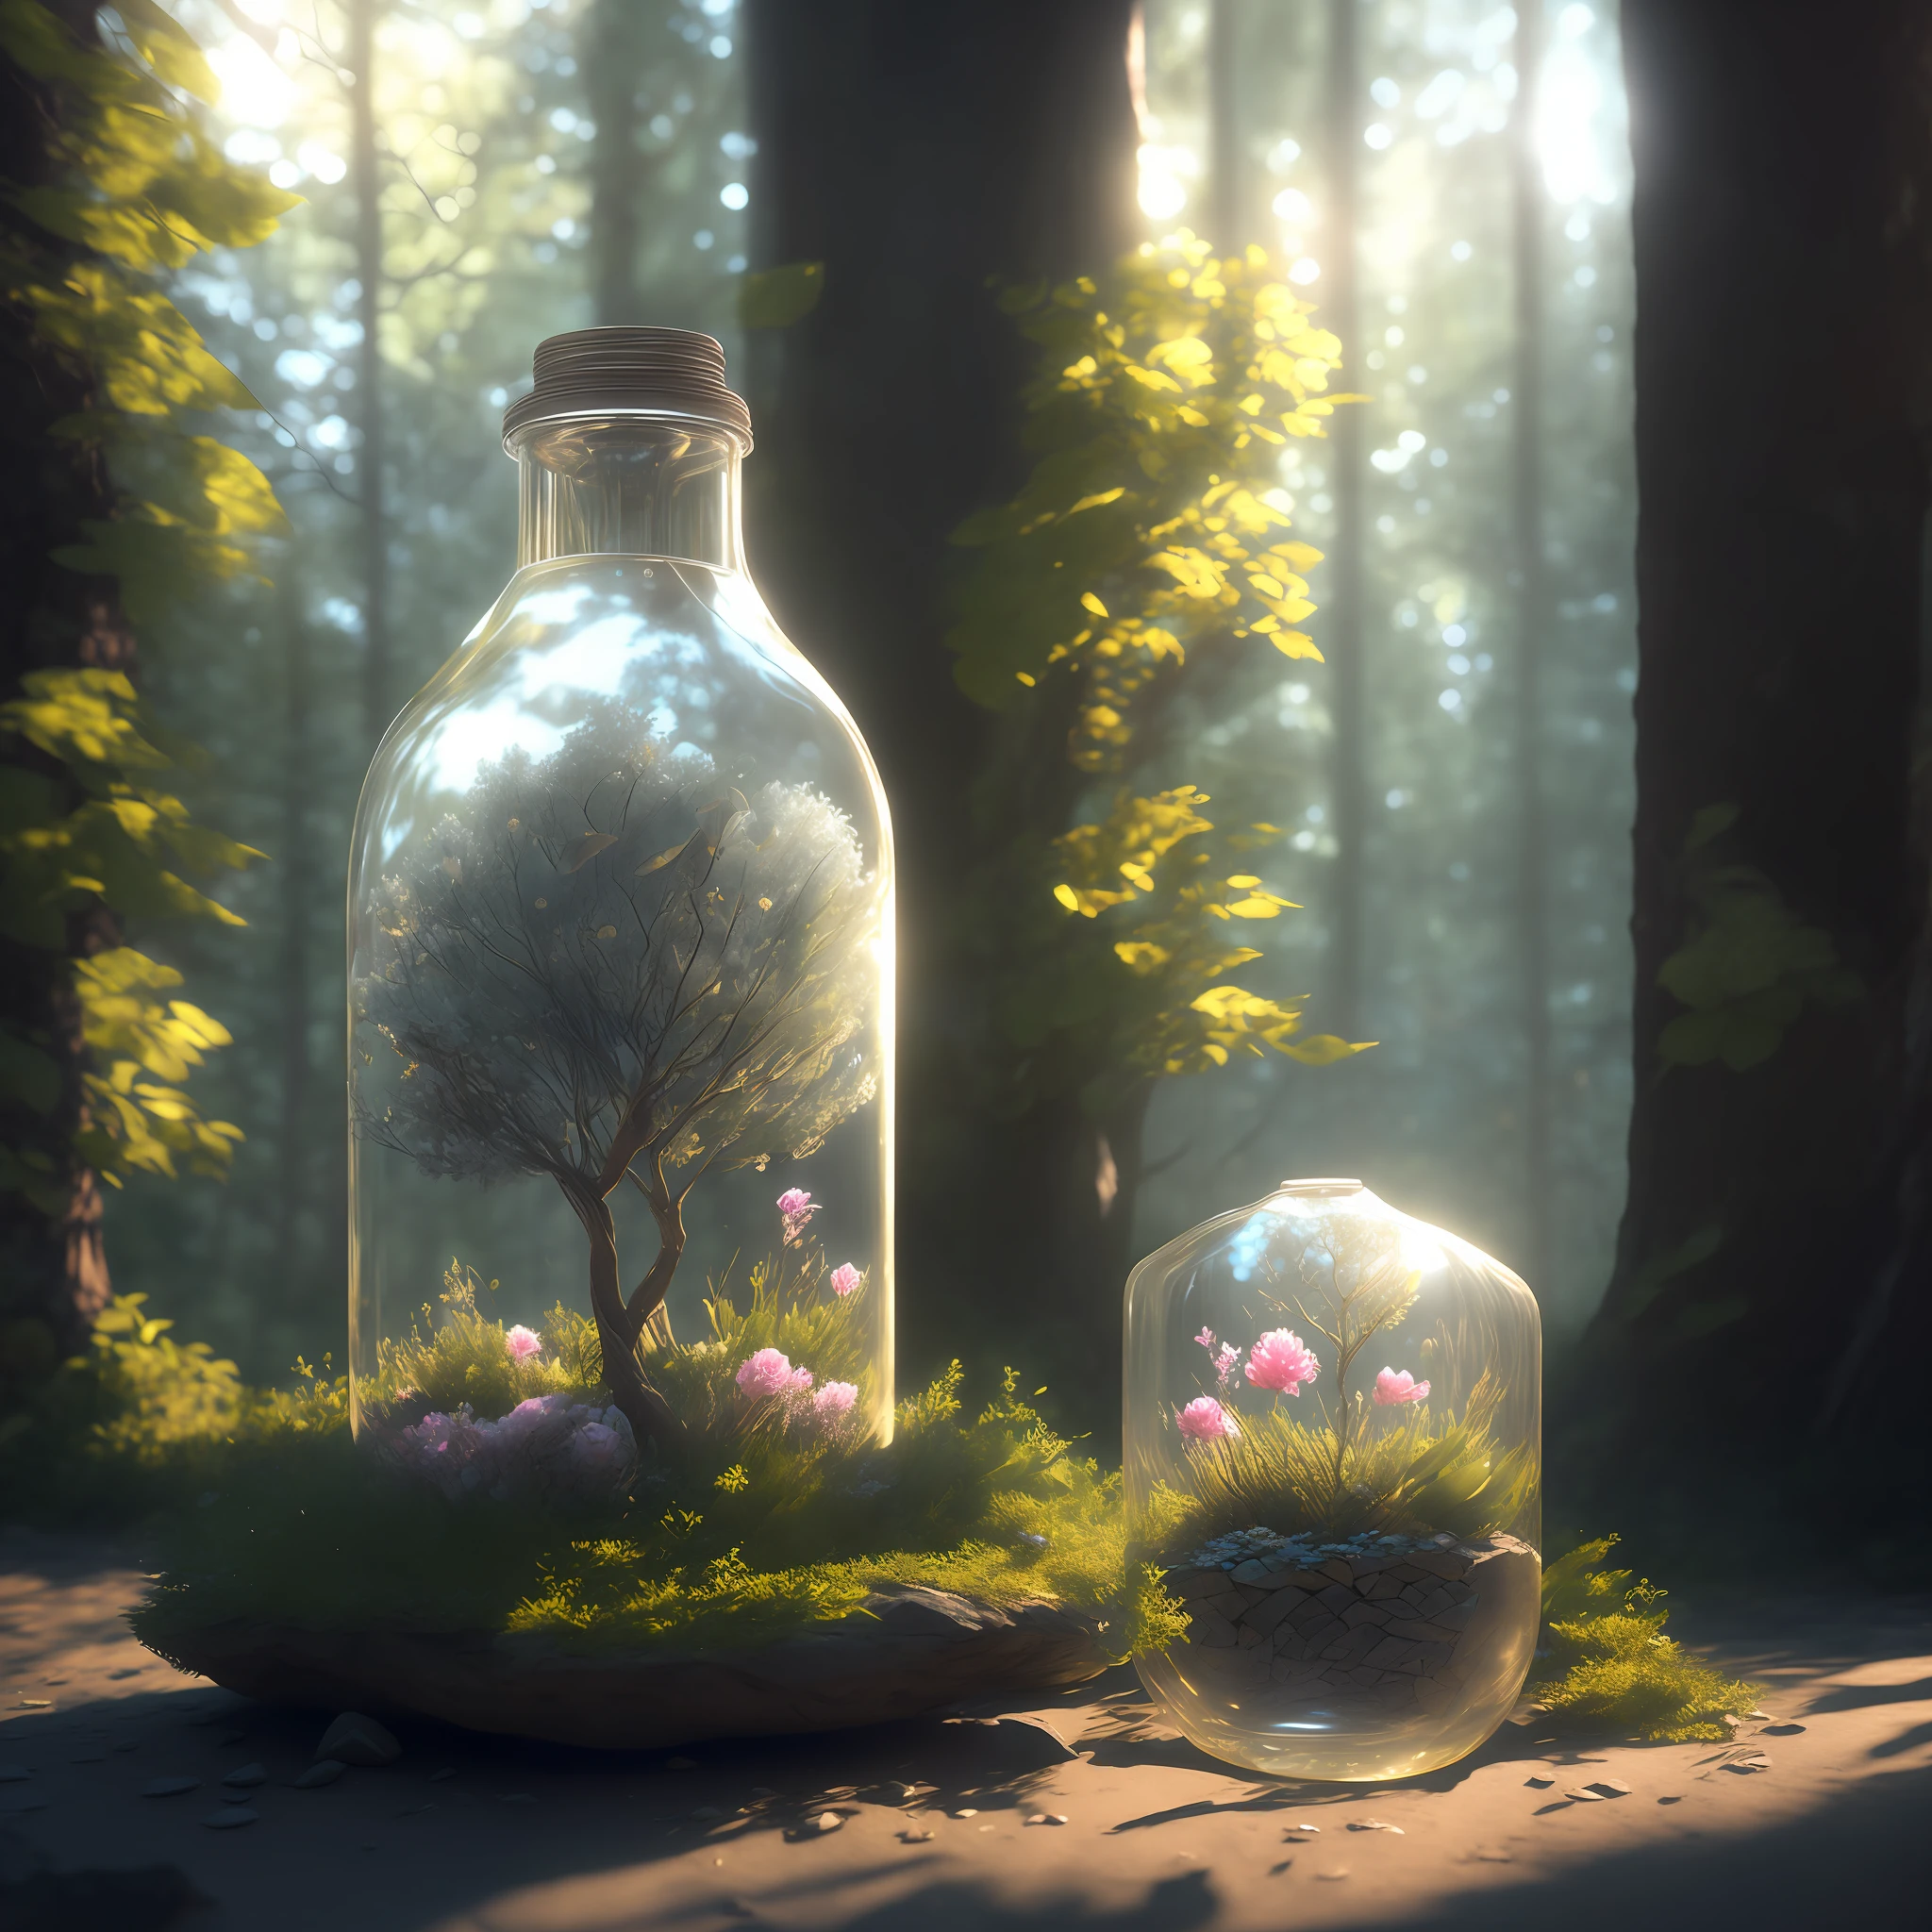 Tree of dreamlike art in a bottle, cute, realistic, photo, canon, dreamlike, art, leaves and colorful branches with flowers on the top of the head in the background a window overlooking the forest. Hyper-detailed photorealism by Greg Rutkowski - H 1024 W 804 | F 1 6 Lens Brand 2:2 S 3555 mm Film Granulation:1 Real High Resolution Sharp Focus Contrast!! intricate detailed atmospheric light refraction lighting unreal engine 5 cinematic concept photography masterpiece octane rendering trend rendering in cgsociety rendered as